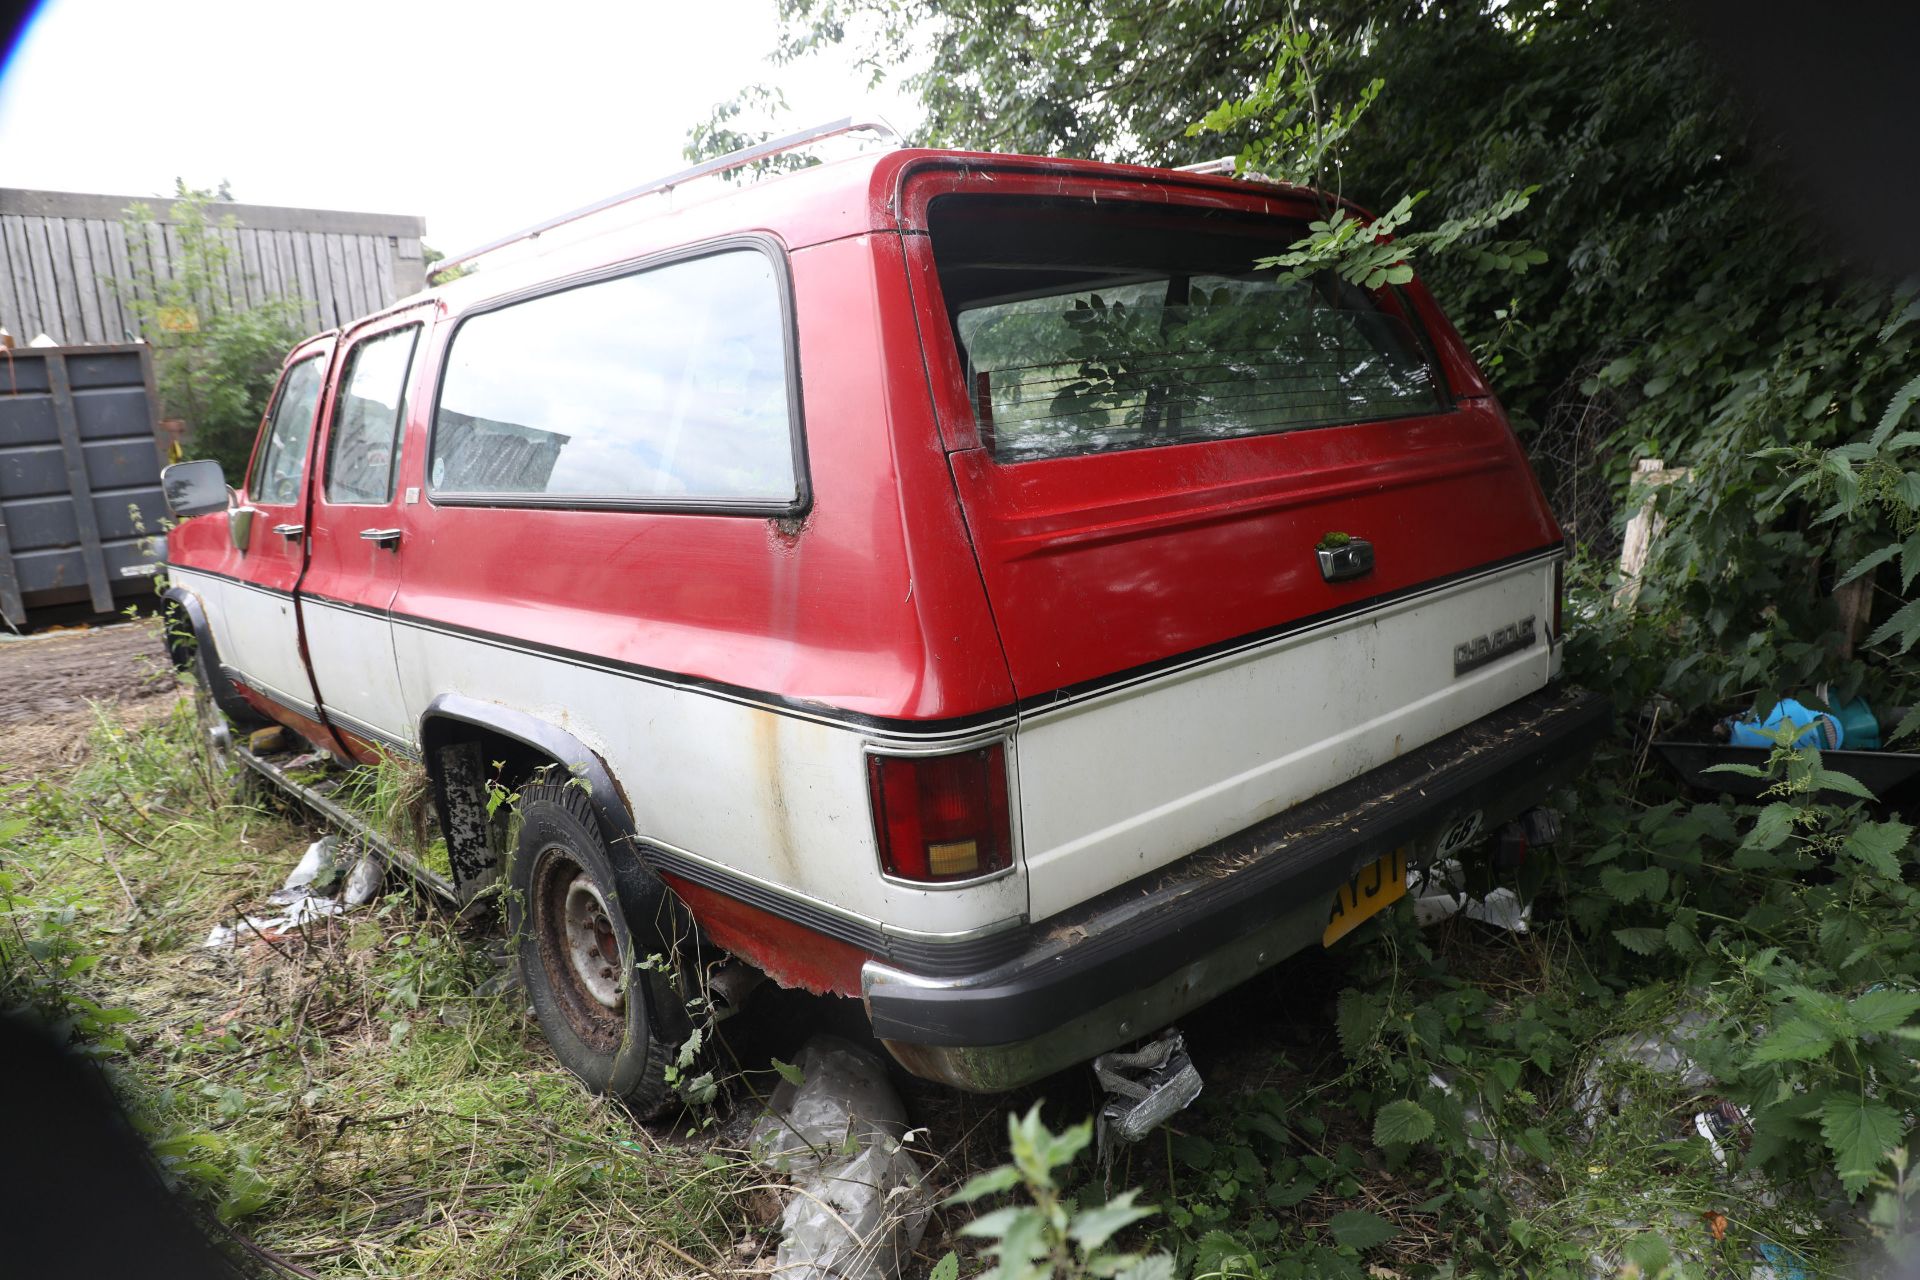 ON INSTRUCTIONS FOLLOWING THE SALE OF A PROPERTY This vehicle is sold as a renovation - Image 19 of 23